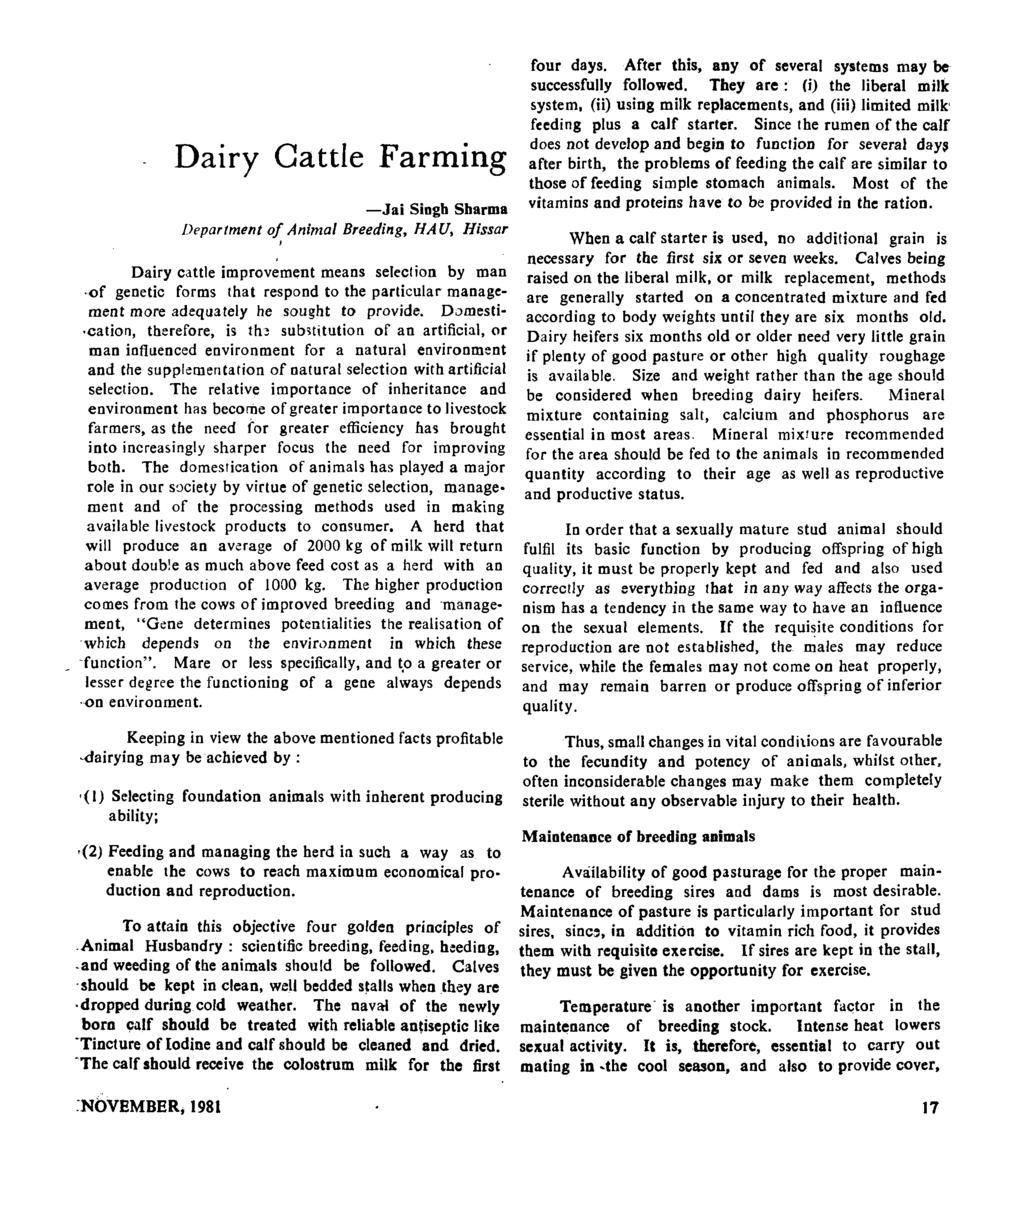 Dairy Cattle Farming -Jai Singh Sharma Department of Animal Breeding, HAU, Hissar, Dairy cattle improvement means selection by man of genetic forms that respond to the particular management more